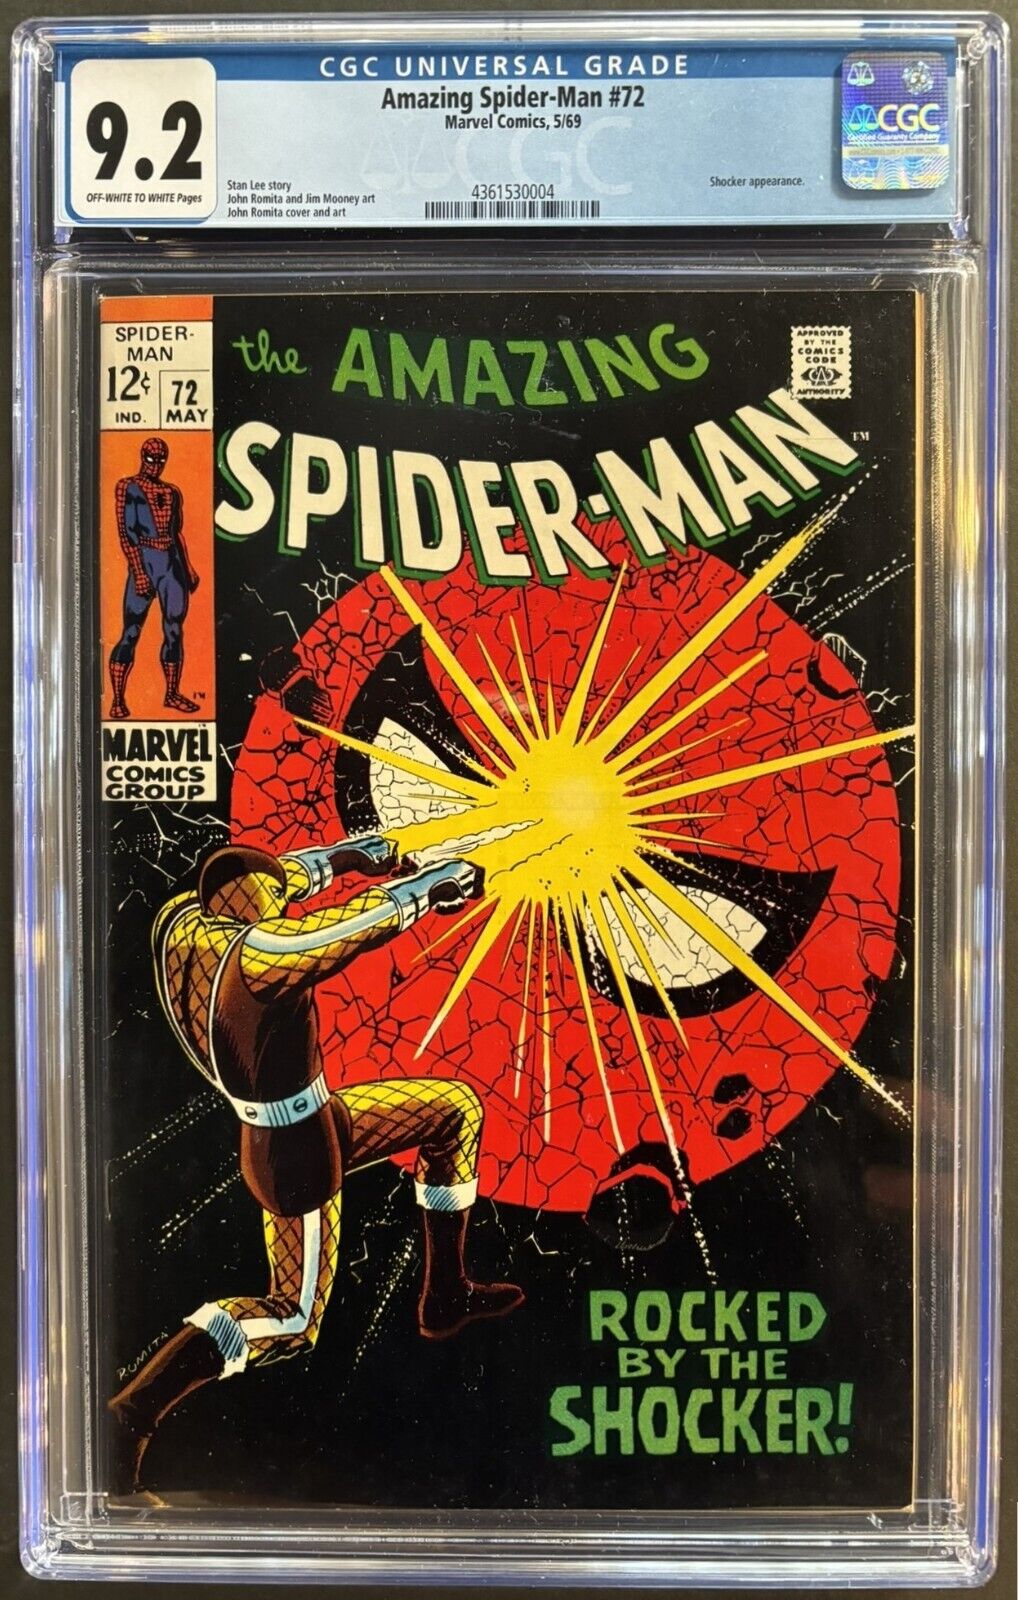 AMAZING SPIDER-MAN #72 CGC 9.2 OW-W MARVEL COMICS MAY 1969 - SHOCKER APPEARANCE